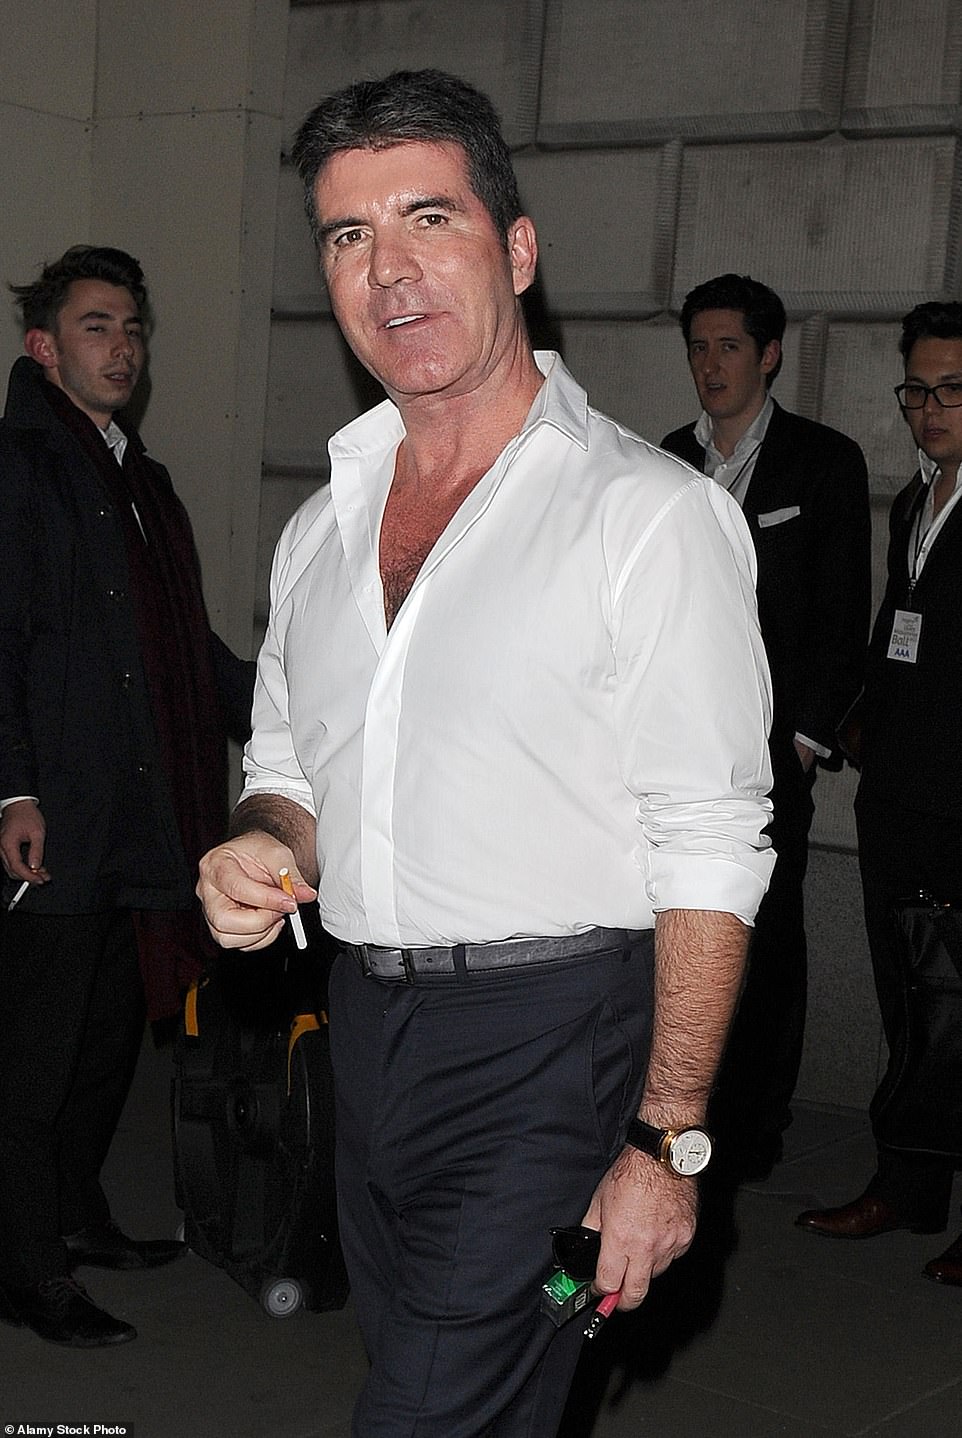 2015: Cowell, a career smoker, prepares to light up as he leaves a private function in London.